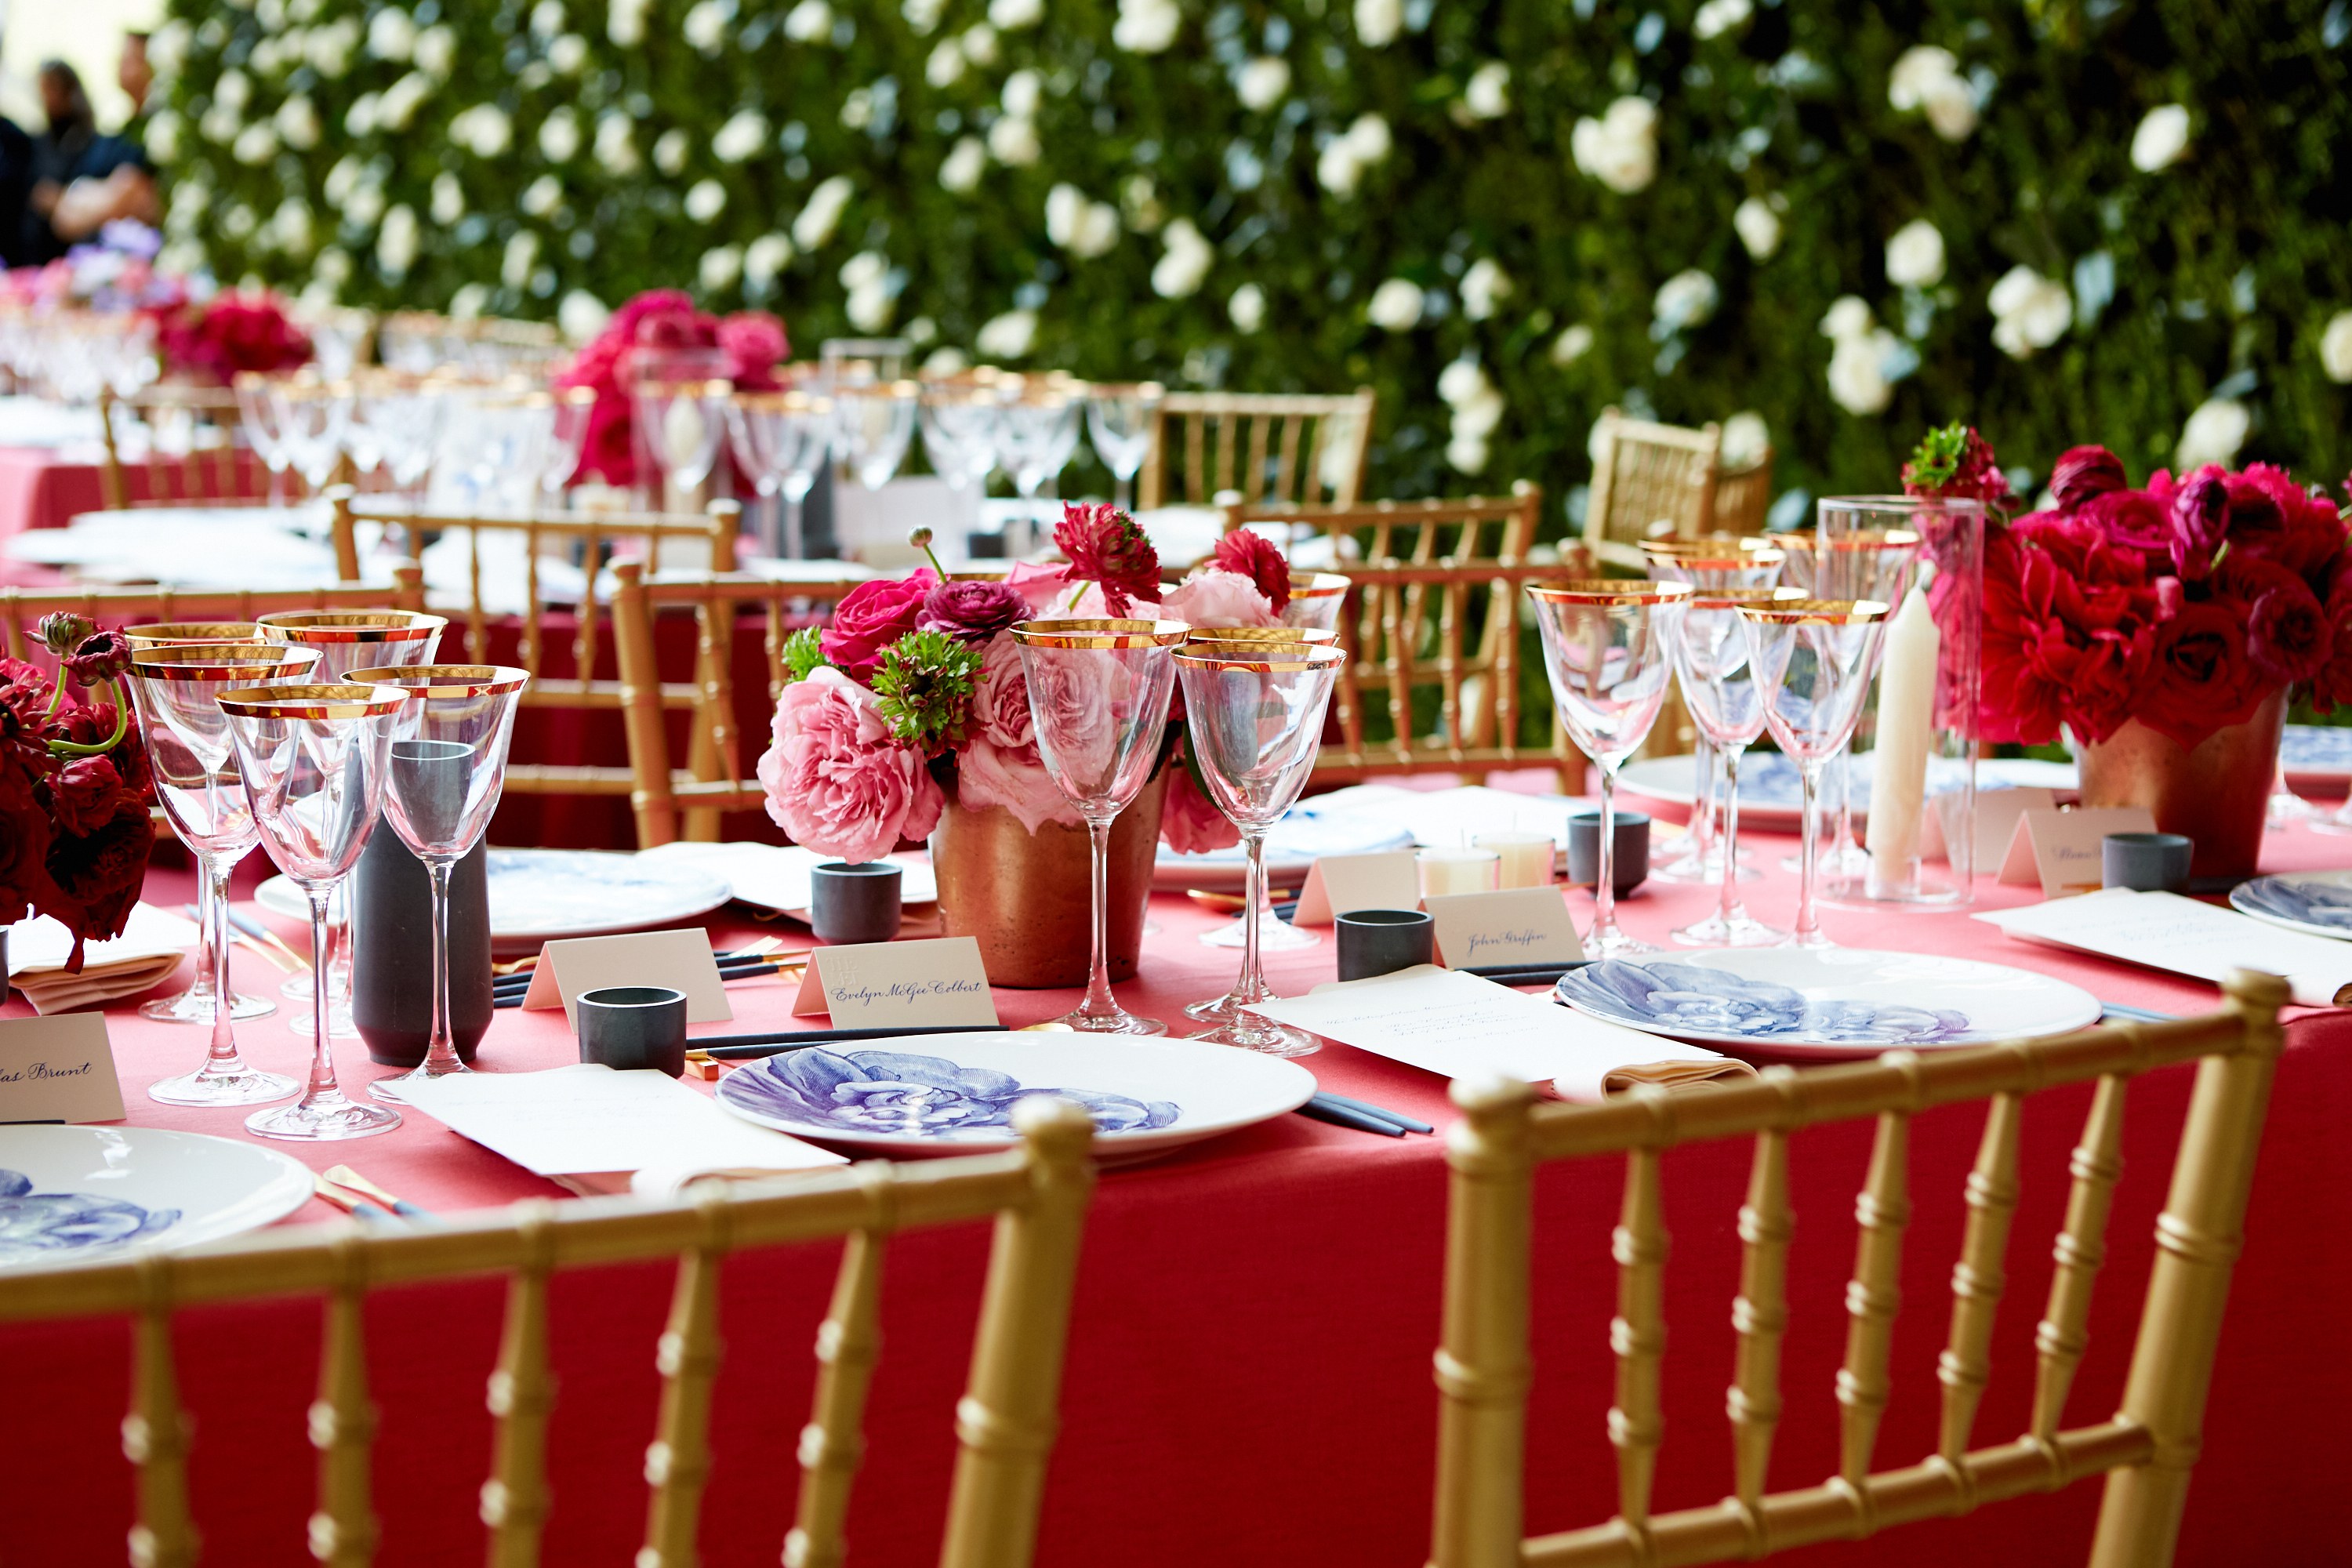 How to Create the Amazing $30,000 Met Gala Table Setting